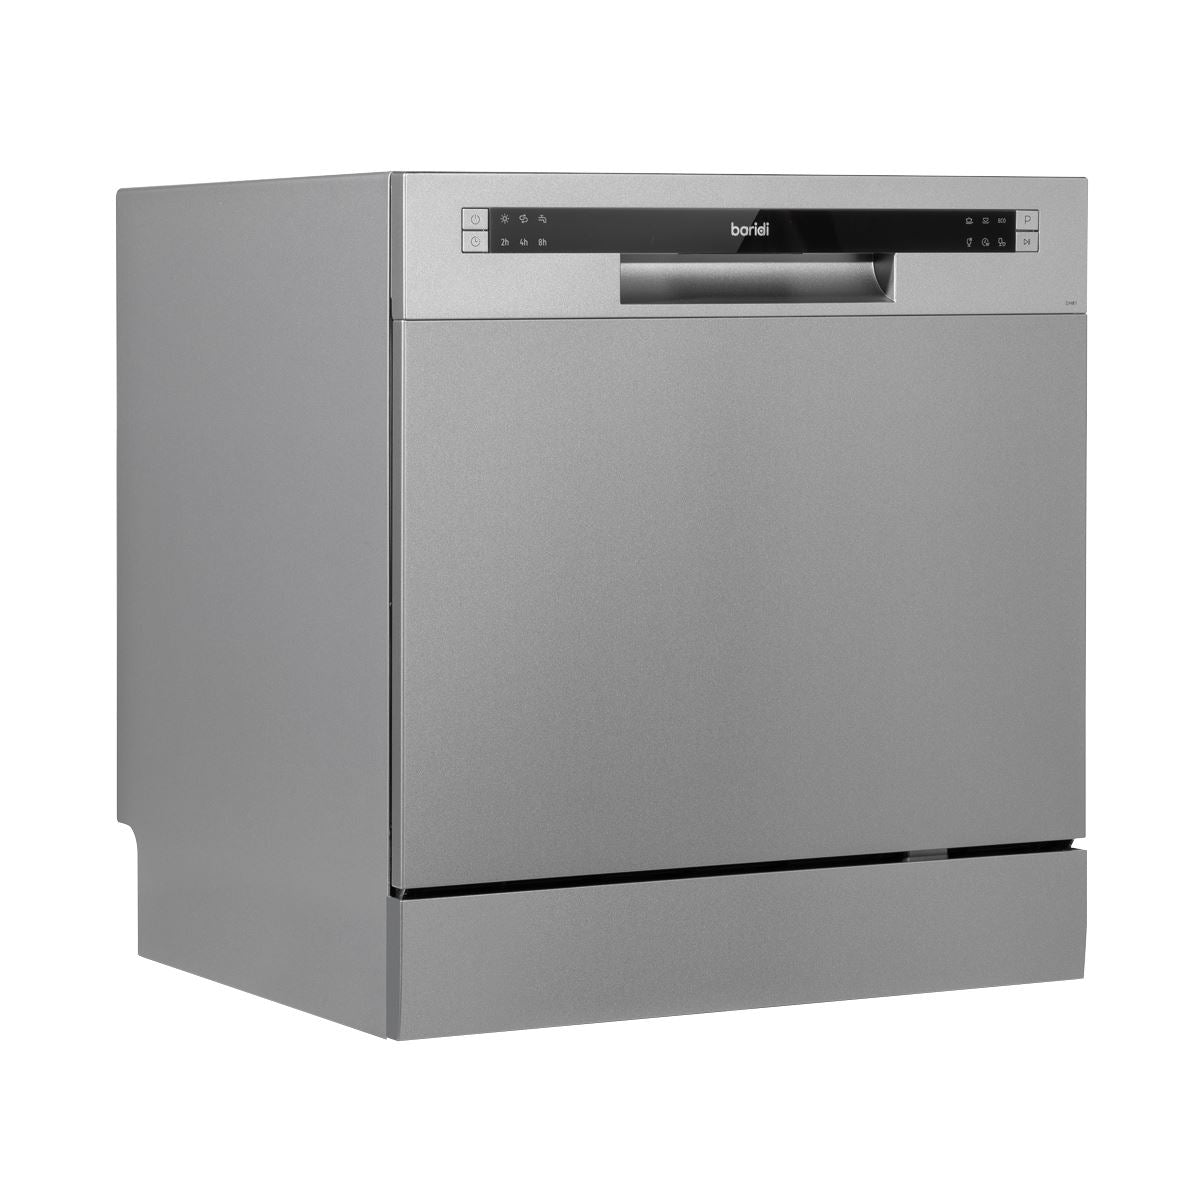 Baridi Compact Tabletop Dishwasher 8 Place Settings, 6 Programmes, Low Noise, 8L Cycle, Start Delay - Silver